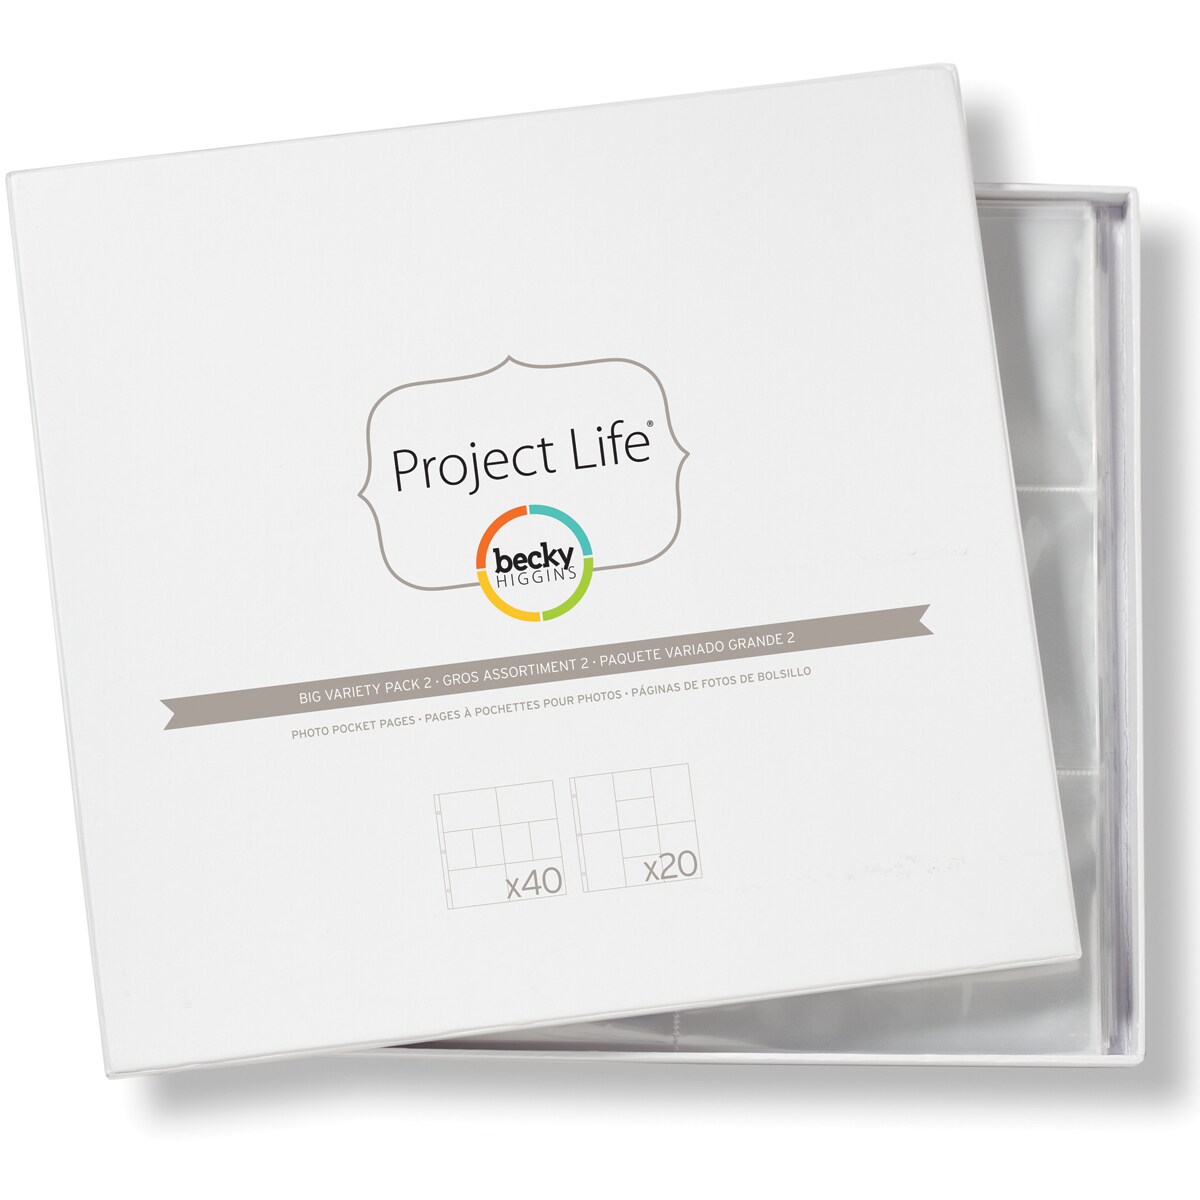 Project Life Photo Pocket Pages 60/Pkg-Big Variety Pack 2